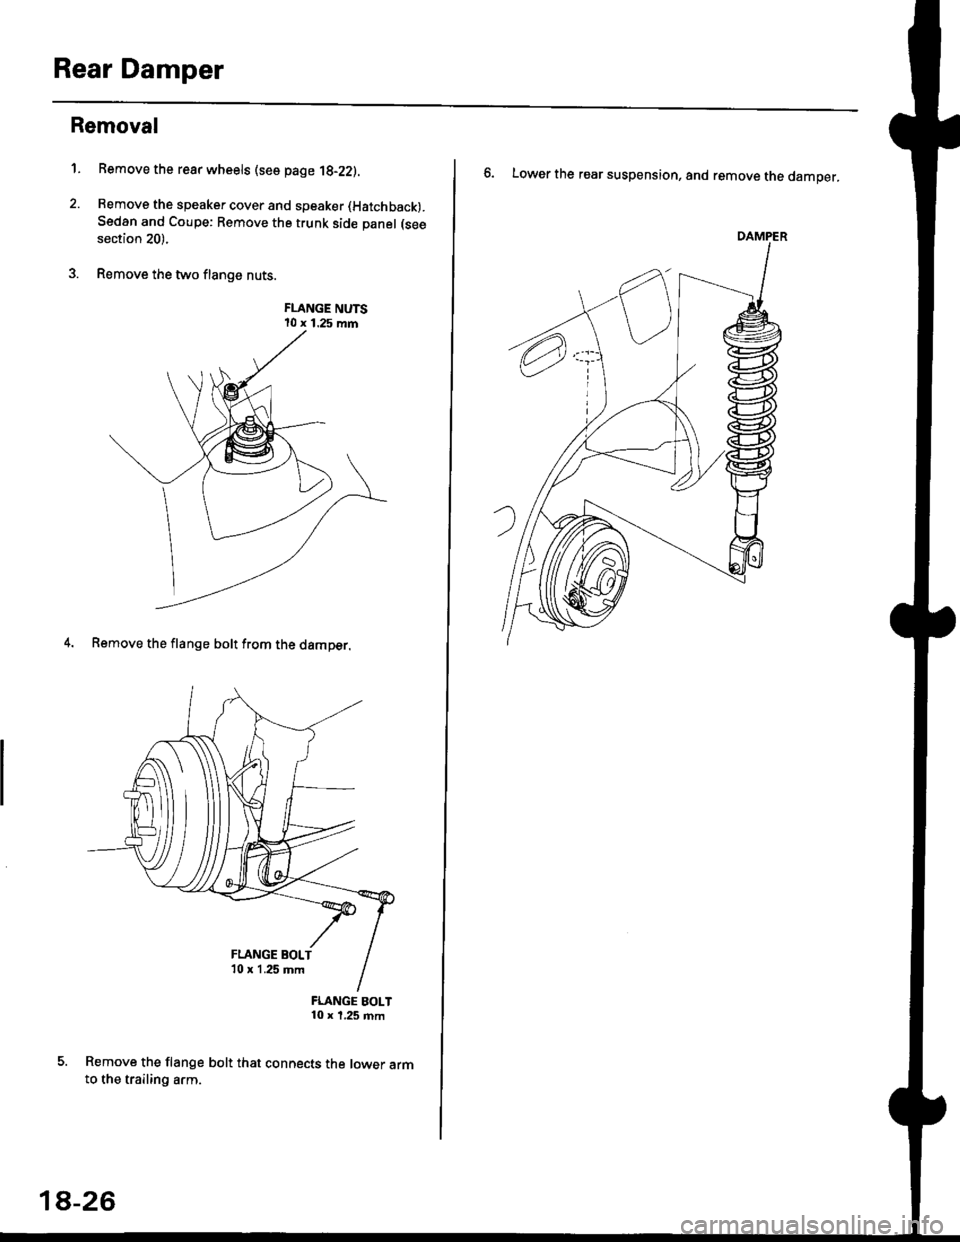 HONDA CIVIC 2000 6.G Workshop Manual Rear Damper
Removal
1. Bemove the rear wheels (see page 1g-22).
2. Remove the speaker cover and speaker (Hatchback).
Sedan and Coupe: Remove the trunk side panel (see
section 20).
3. Remove the two fl